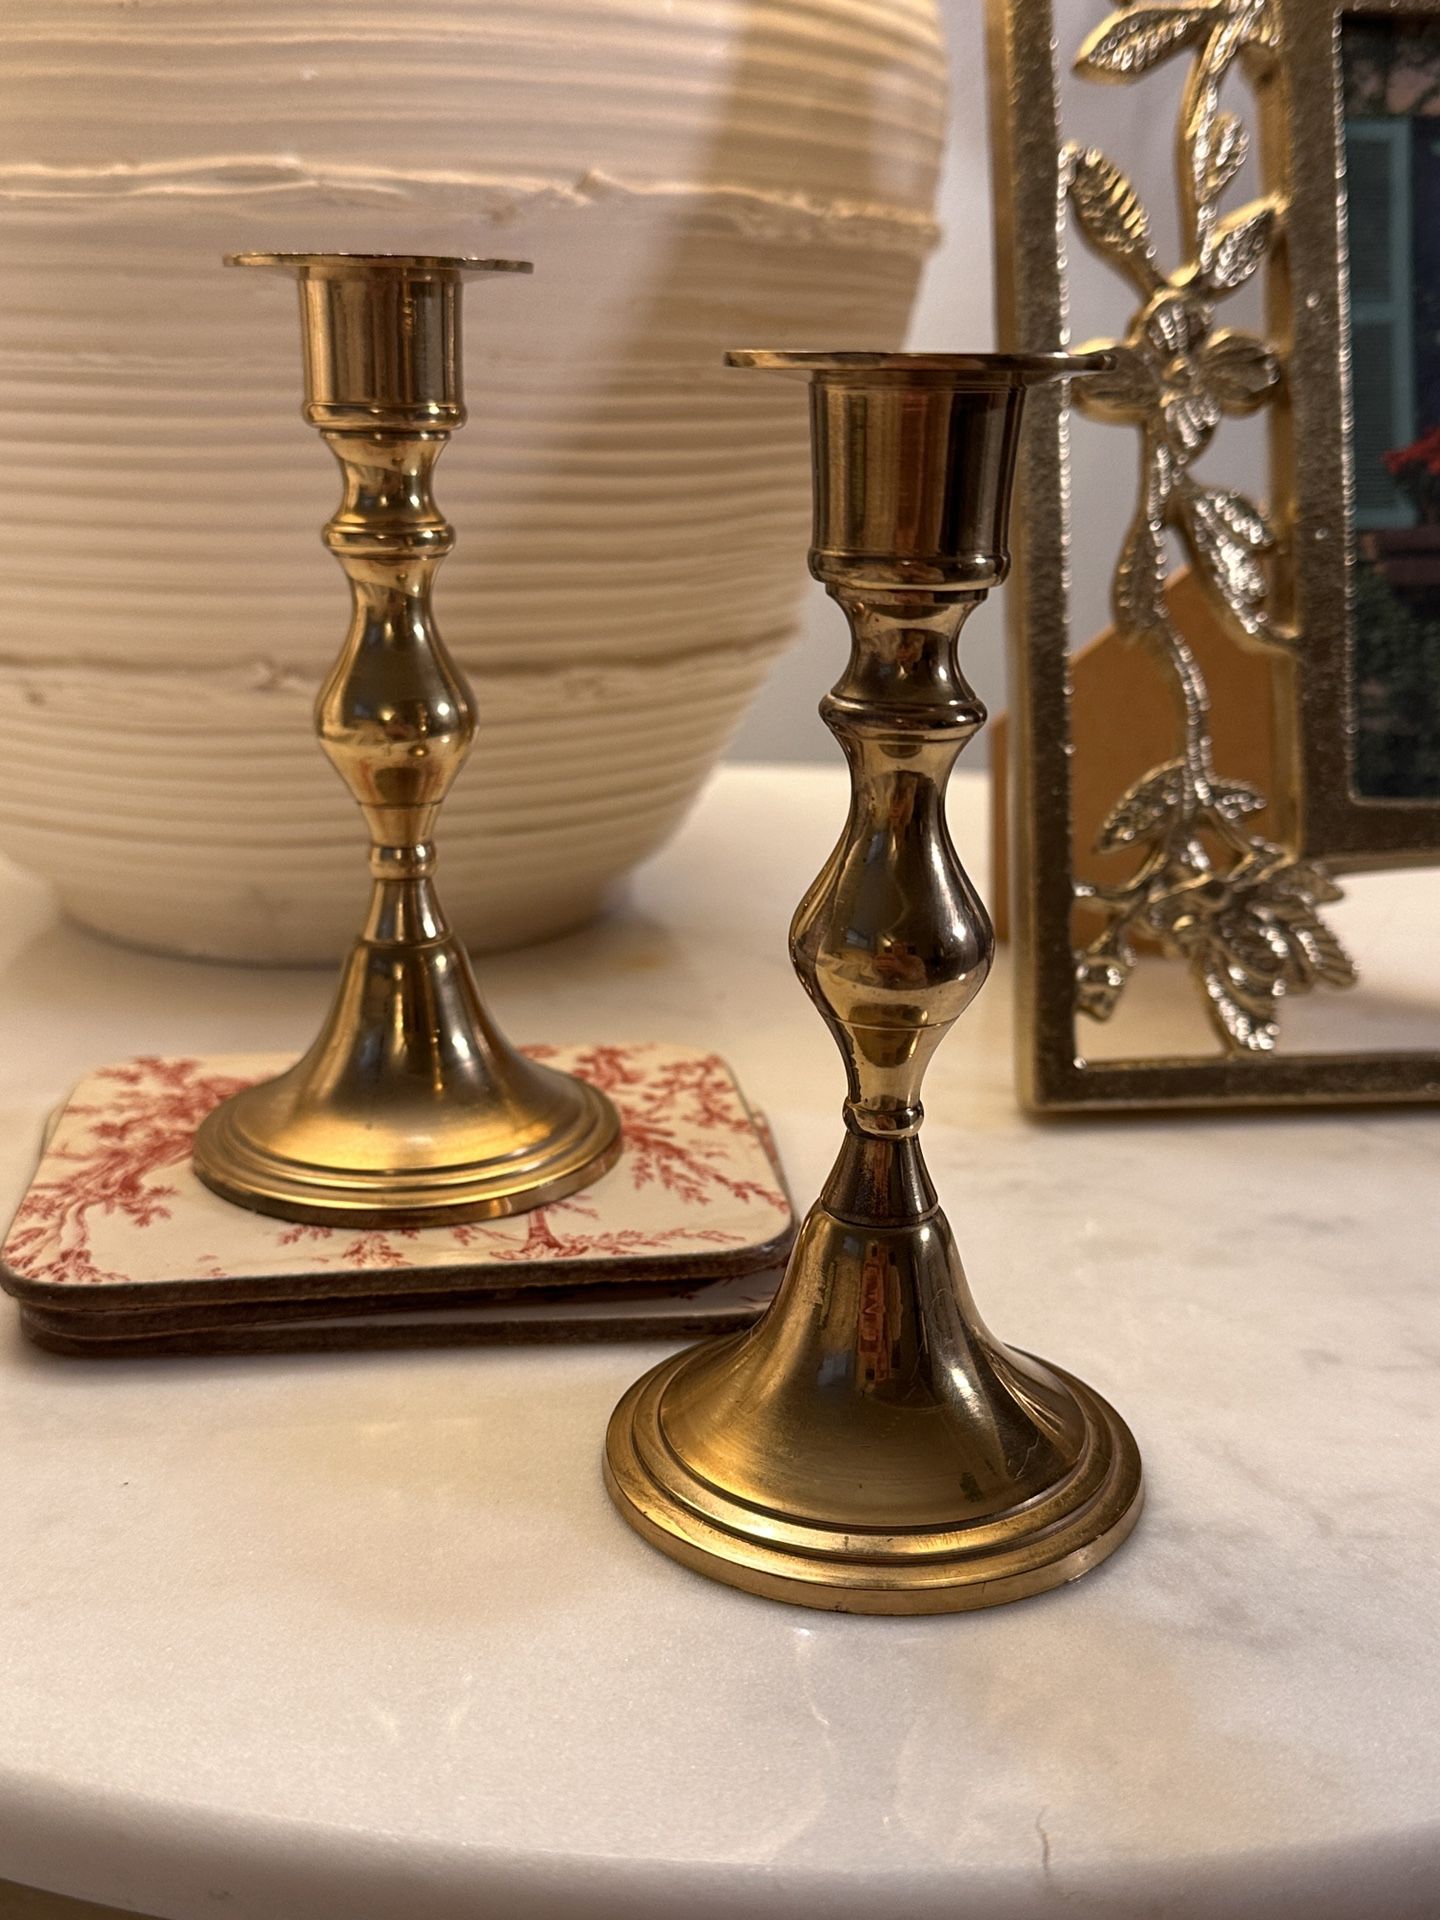 Set Of 2 Brass Candle holders 